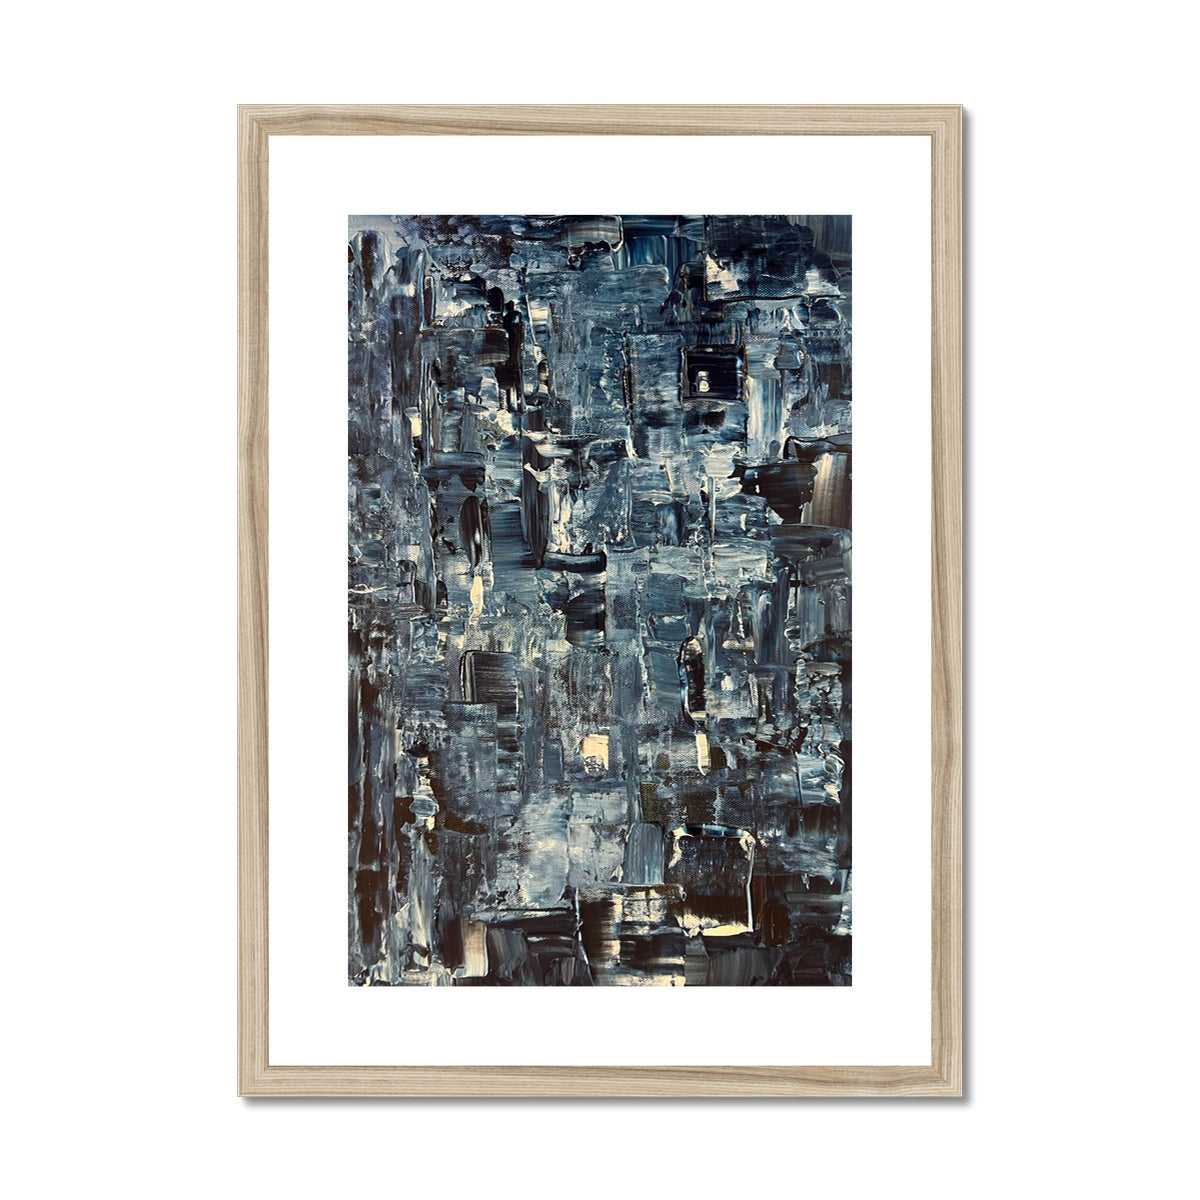 Inception Abstract Painting | Framed & Mounted Prints From Scotland-Framed & Mounted Prints-Abstract & Impressionistic Art Gallery-A2 Portrait-Natural Frame-Paintings, Prints, Homeware, Art Gifts From Scotland By Scottish Artist Kevin Hunter